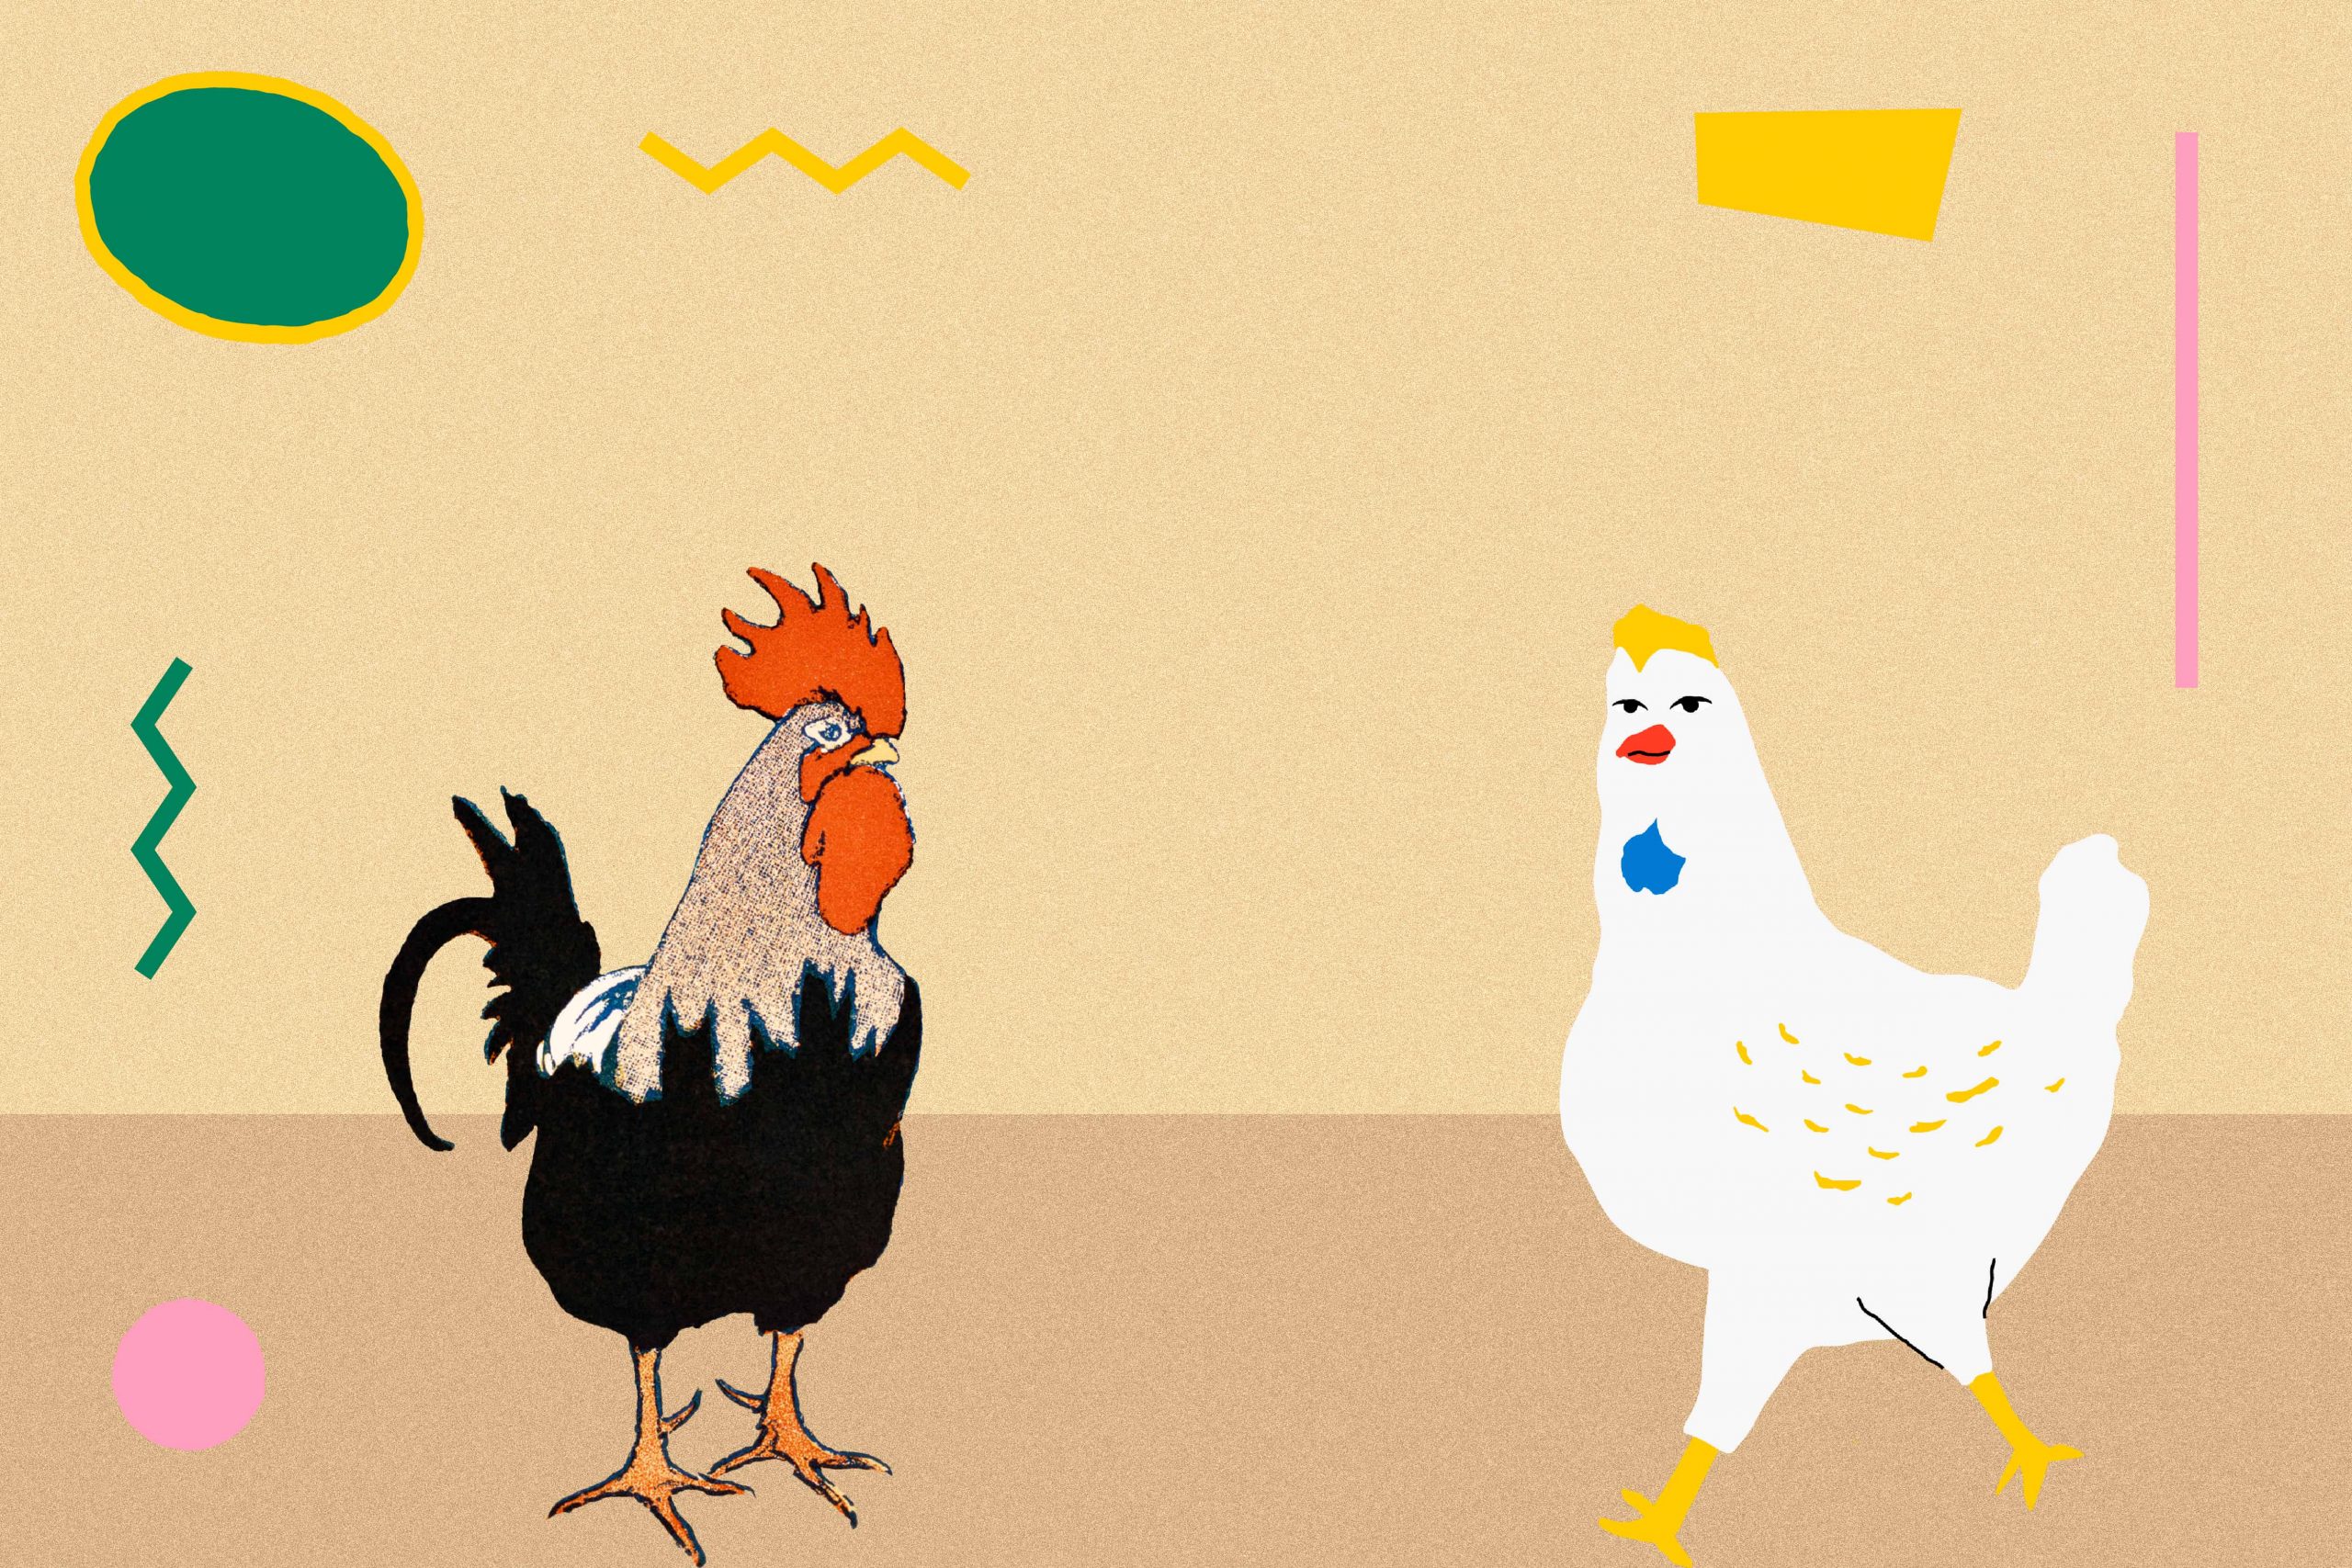 75 Chicken Jokes That Will Crack You Up